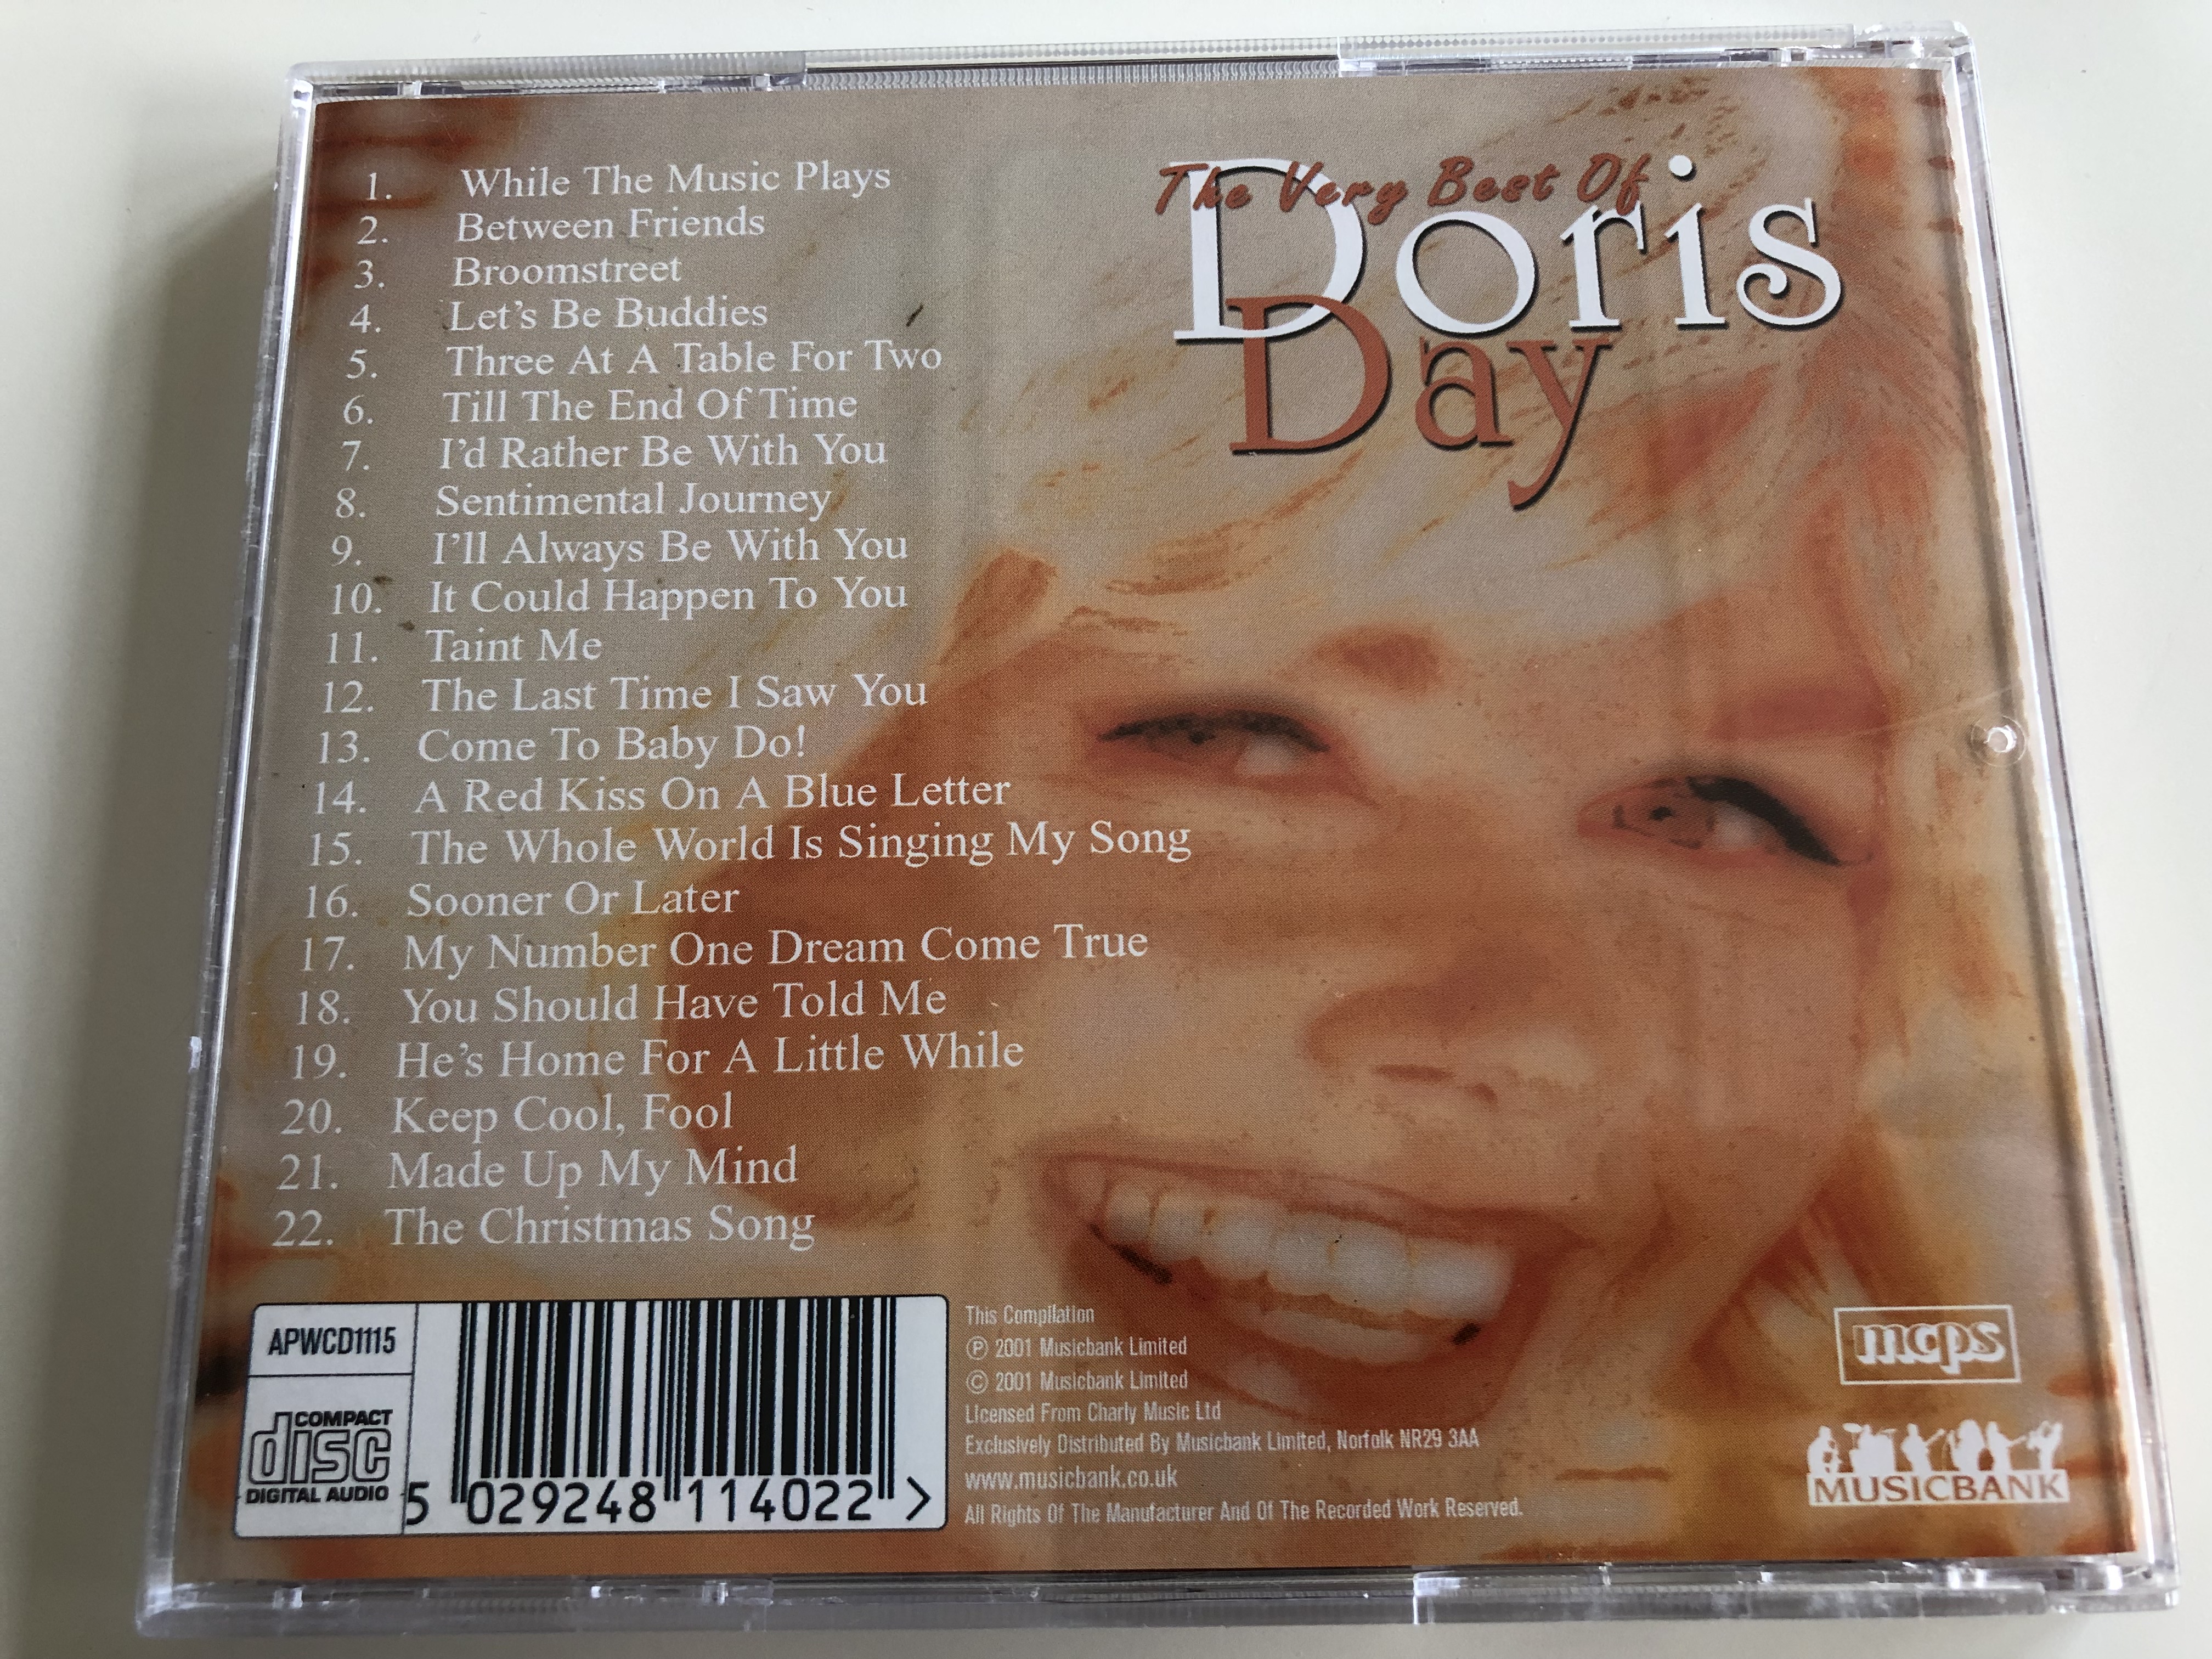 the-very-best-of-doris-day-my-number-one-dream-come-true-the-last-time-i-saw-you-the-whole-world-is-singing-my-song-audio-cd-2001-musicbank-apwcd115-4-.jpg